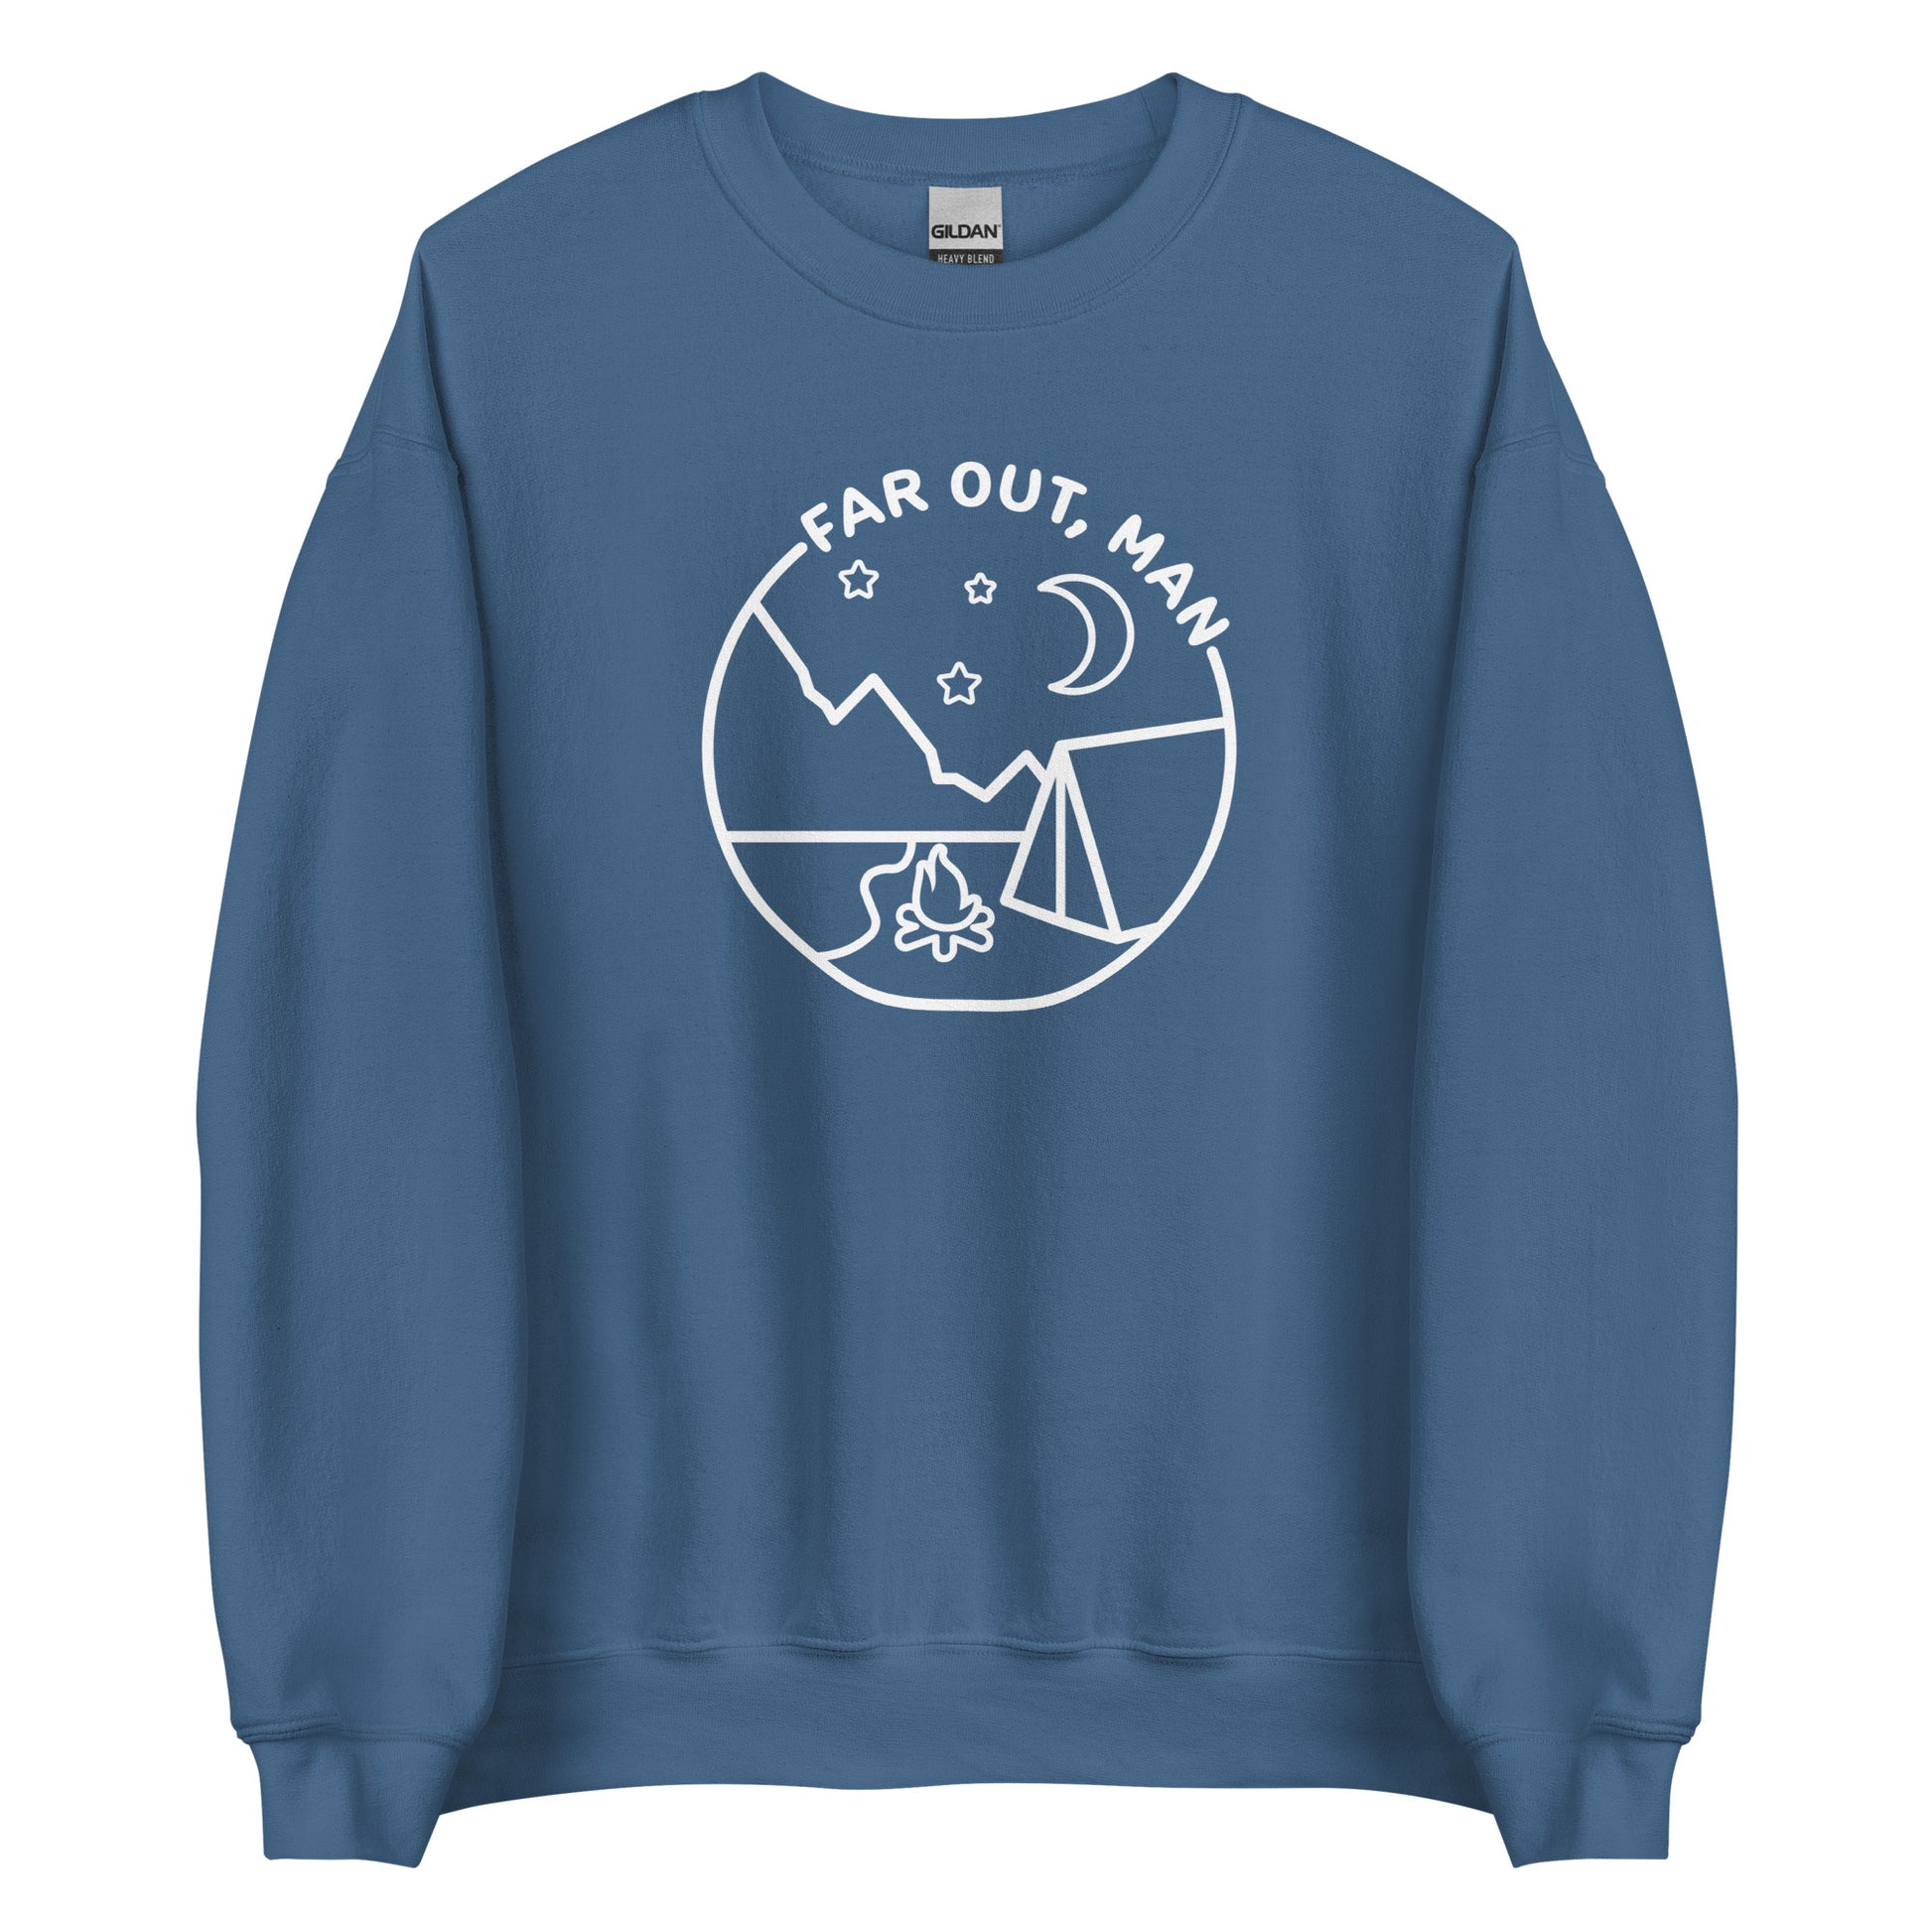 A blue crewneck sweatshirt featuring a white lineart illustration of a tent and campfire under a night sky. Text in an arc above the illustration reads "Far out, man"